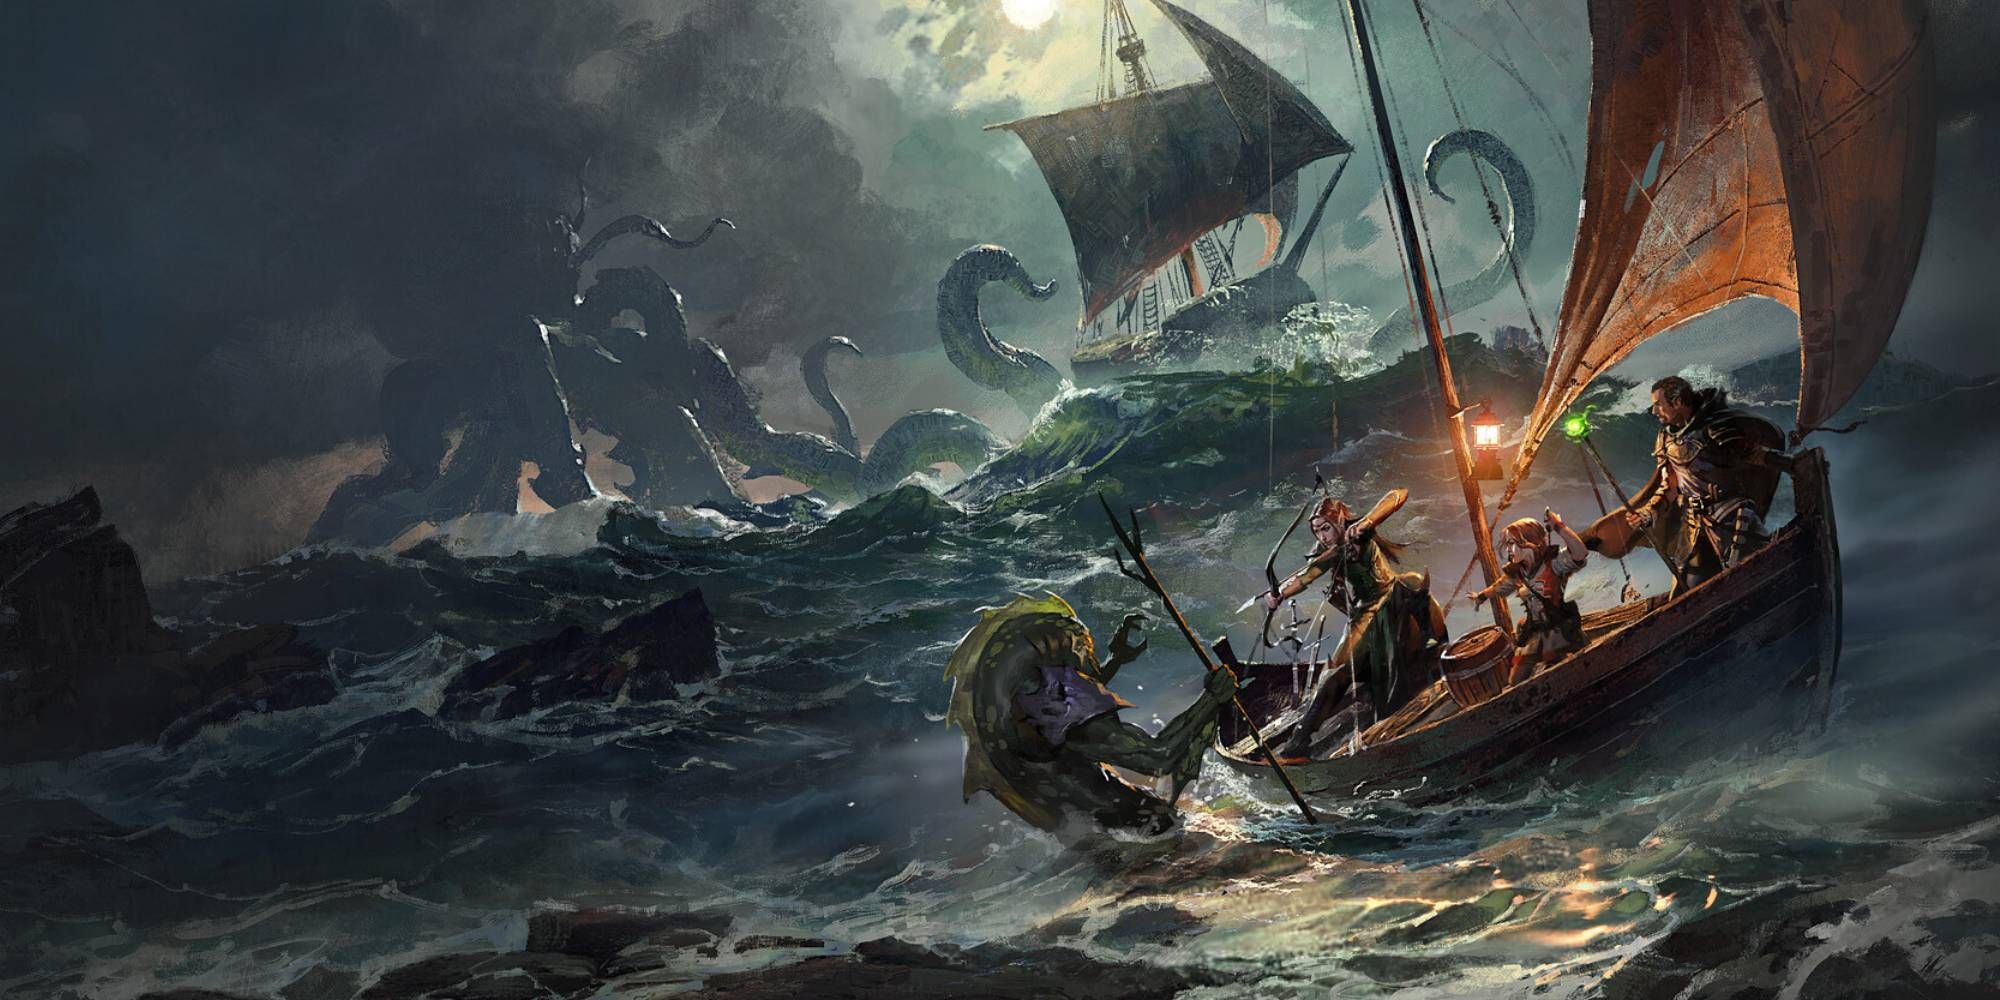 A group of adventurers battle on a stormy sea as tentacles attack a ship in the background